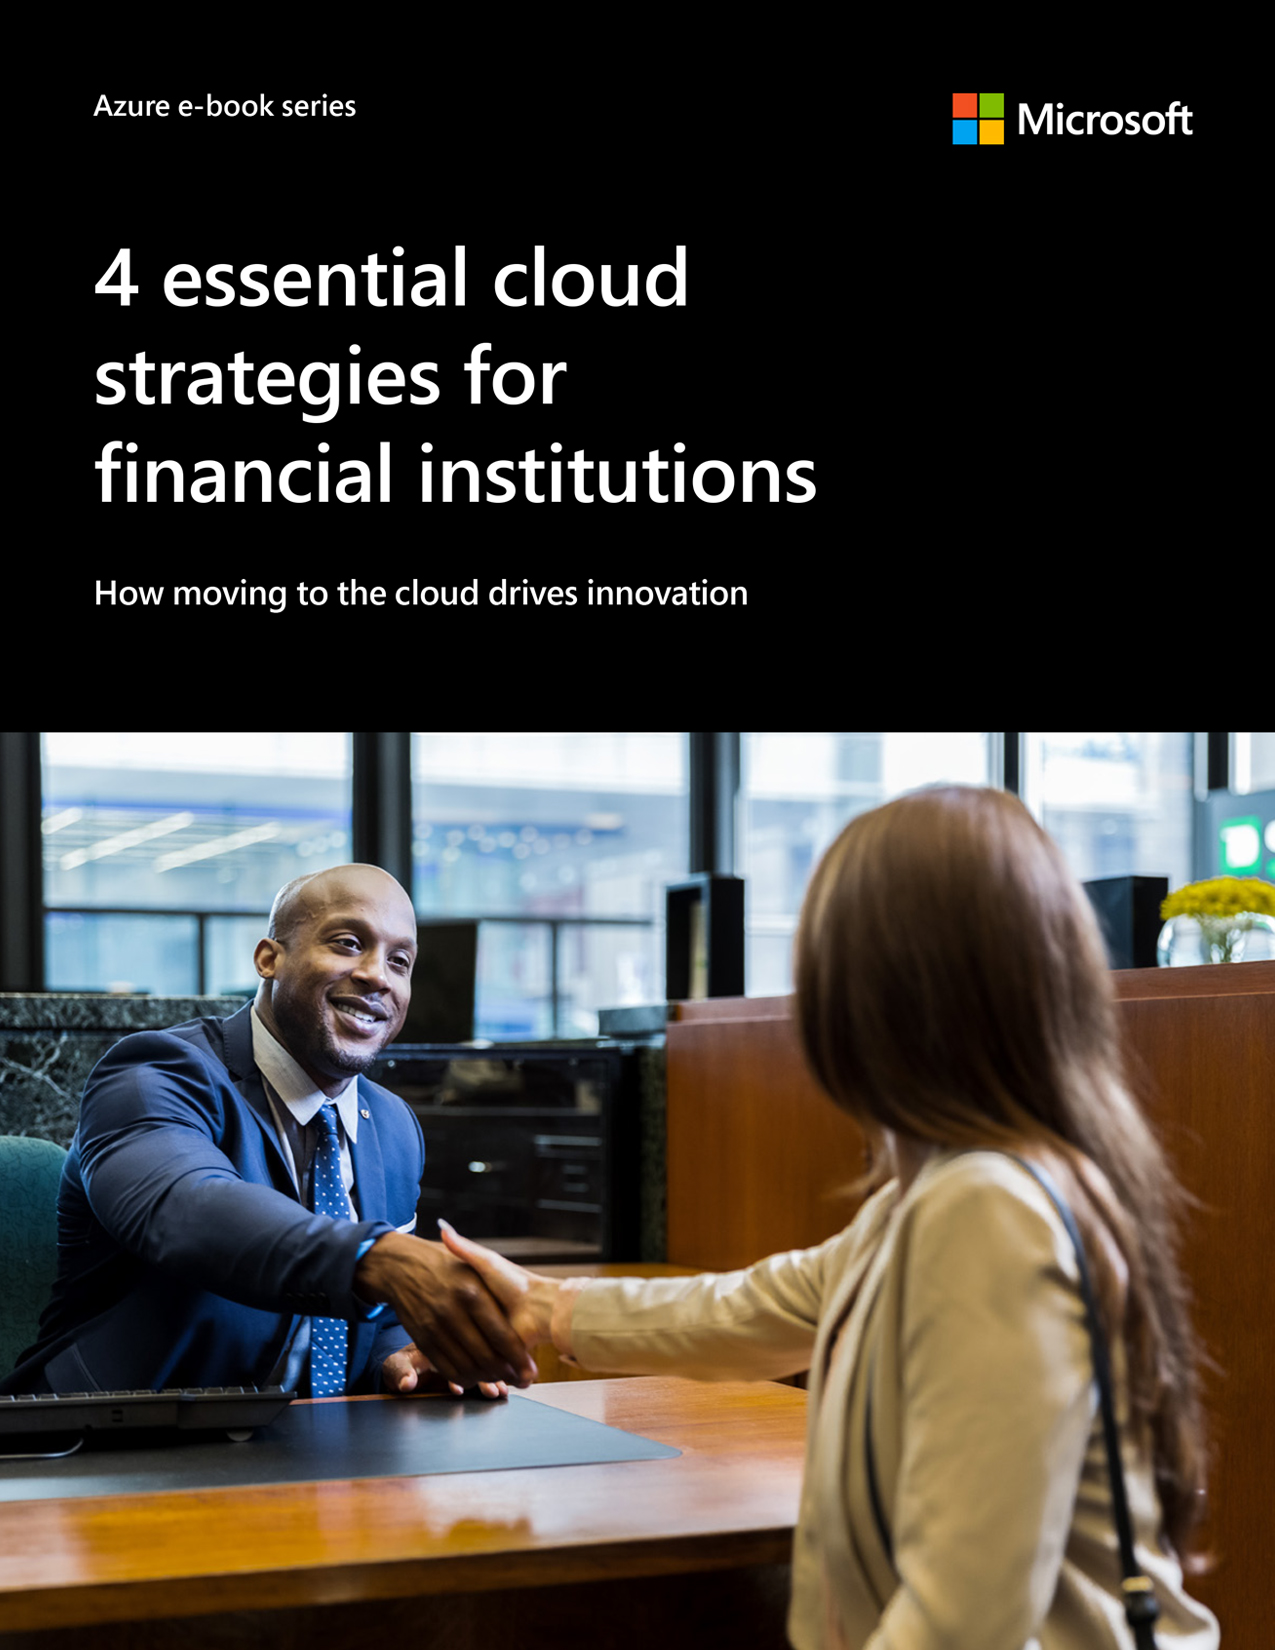 4 essential cloud strategies for financial institutions